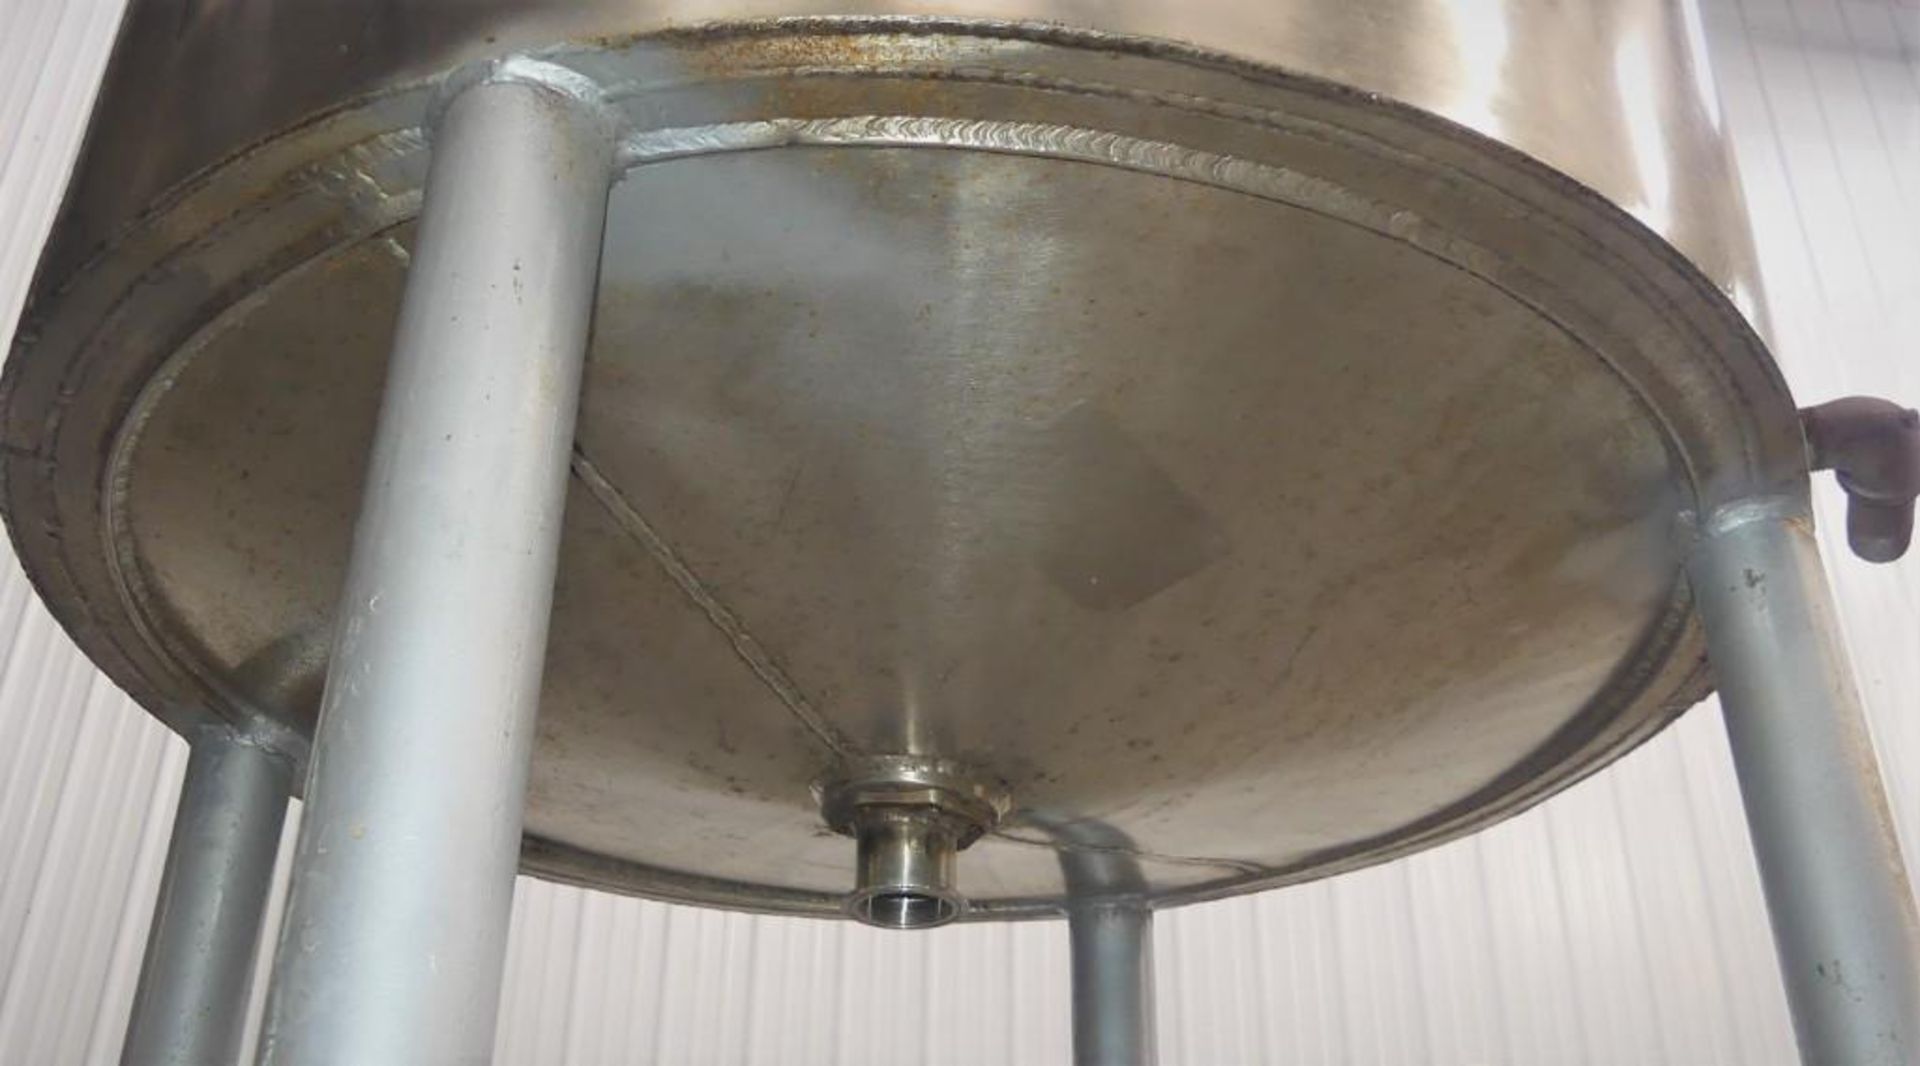 B&G Machine Company 100 Gallon Stainless Steel Jacketed Mixing Tank - Image 22 of 23